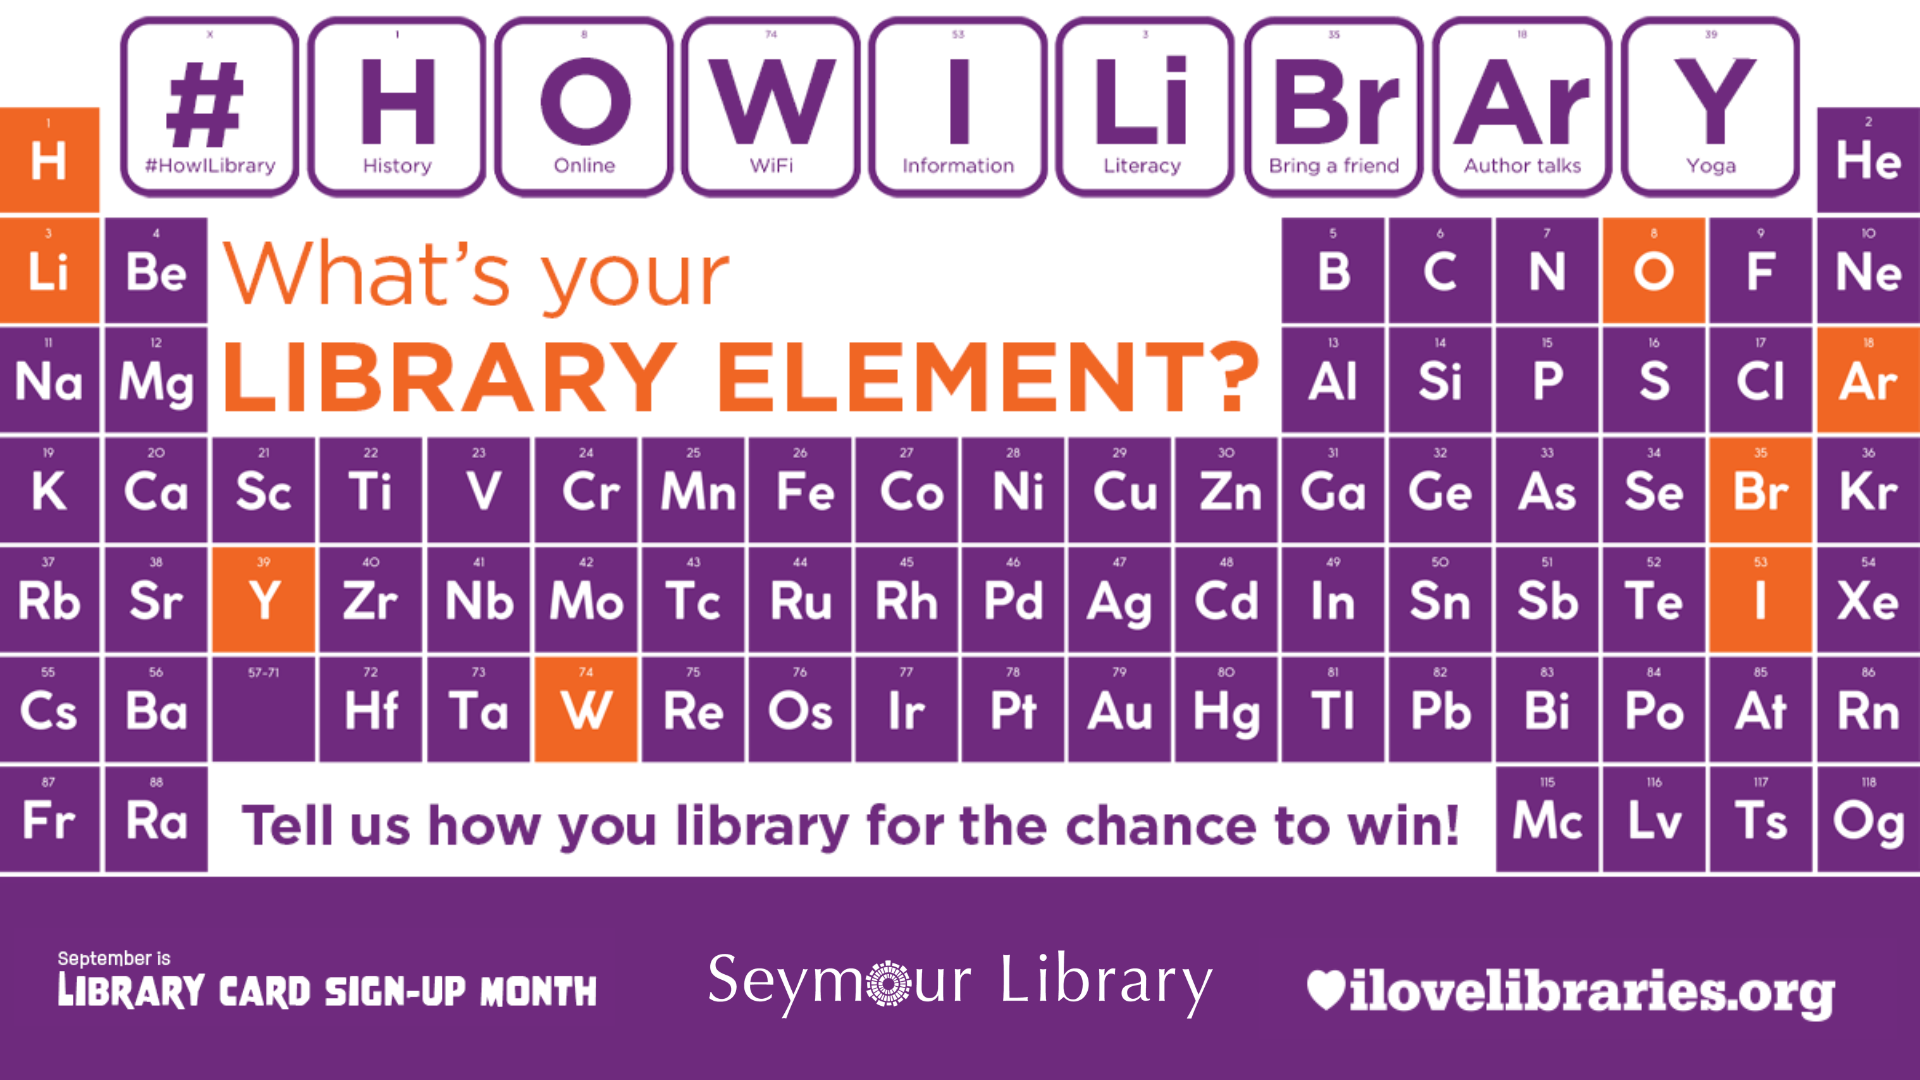 How Do You Library?